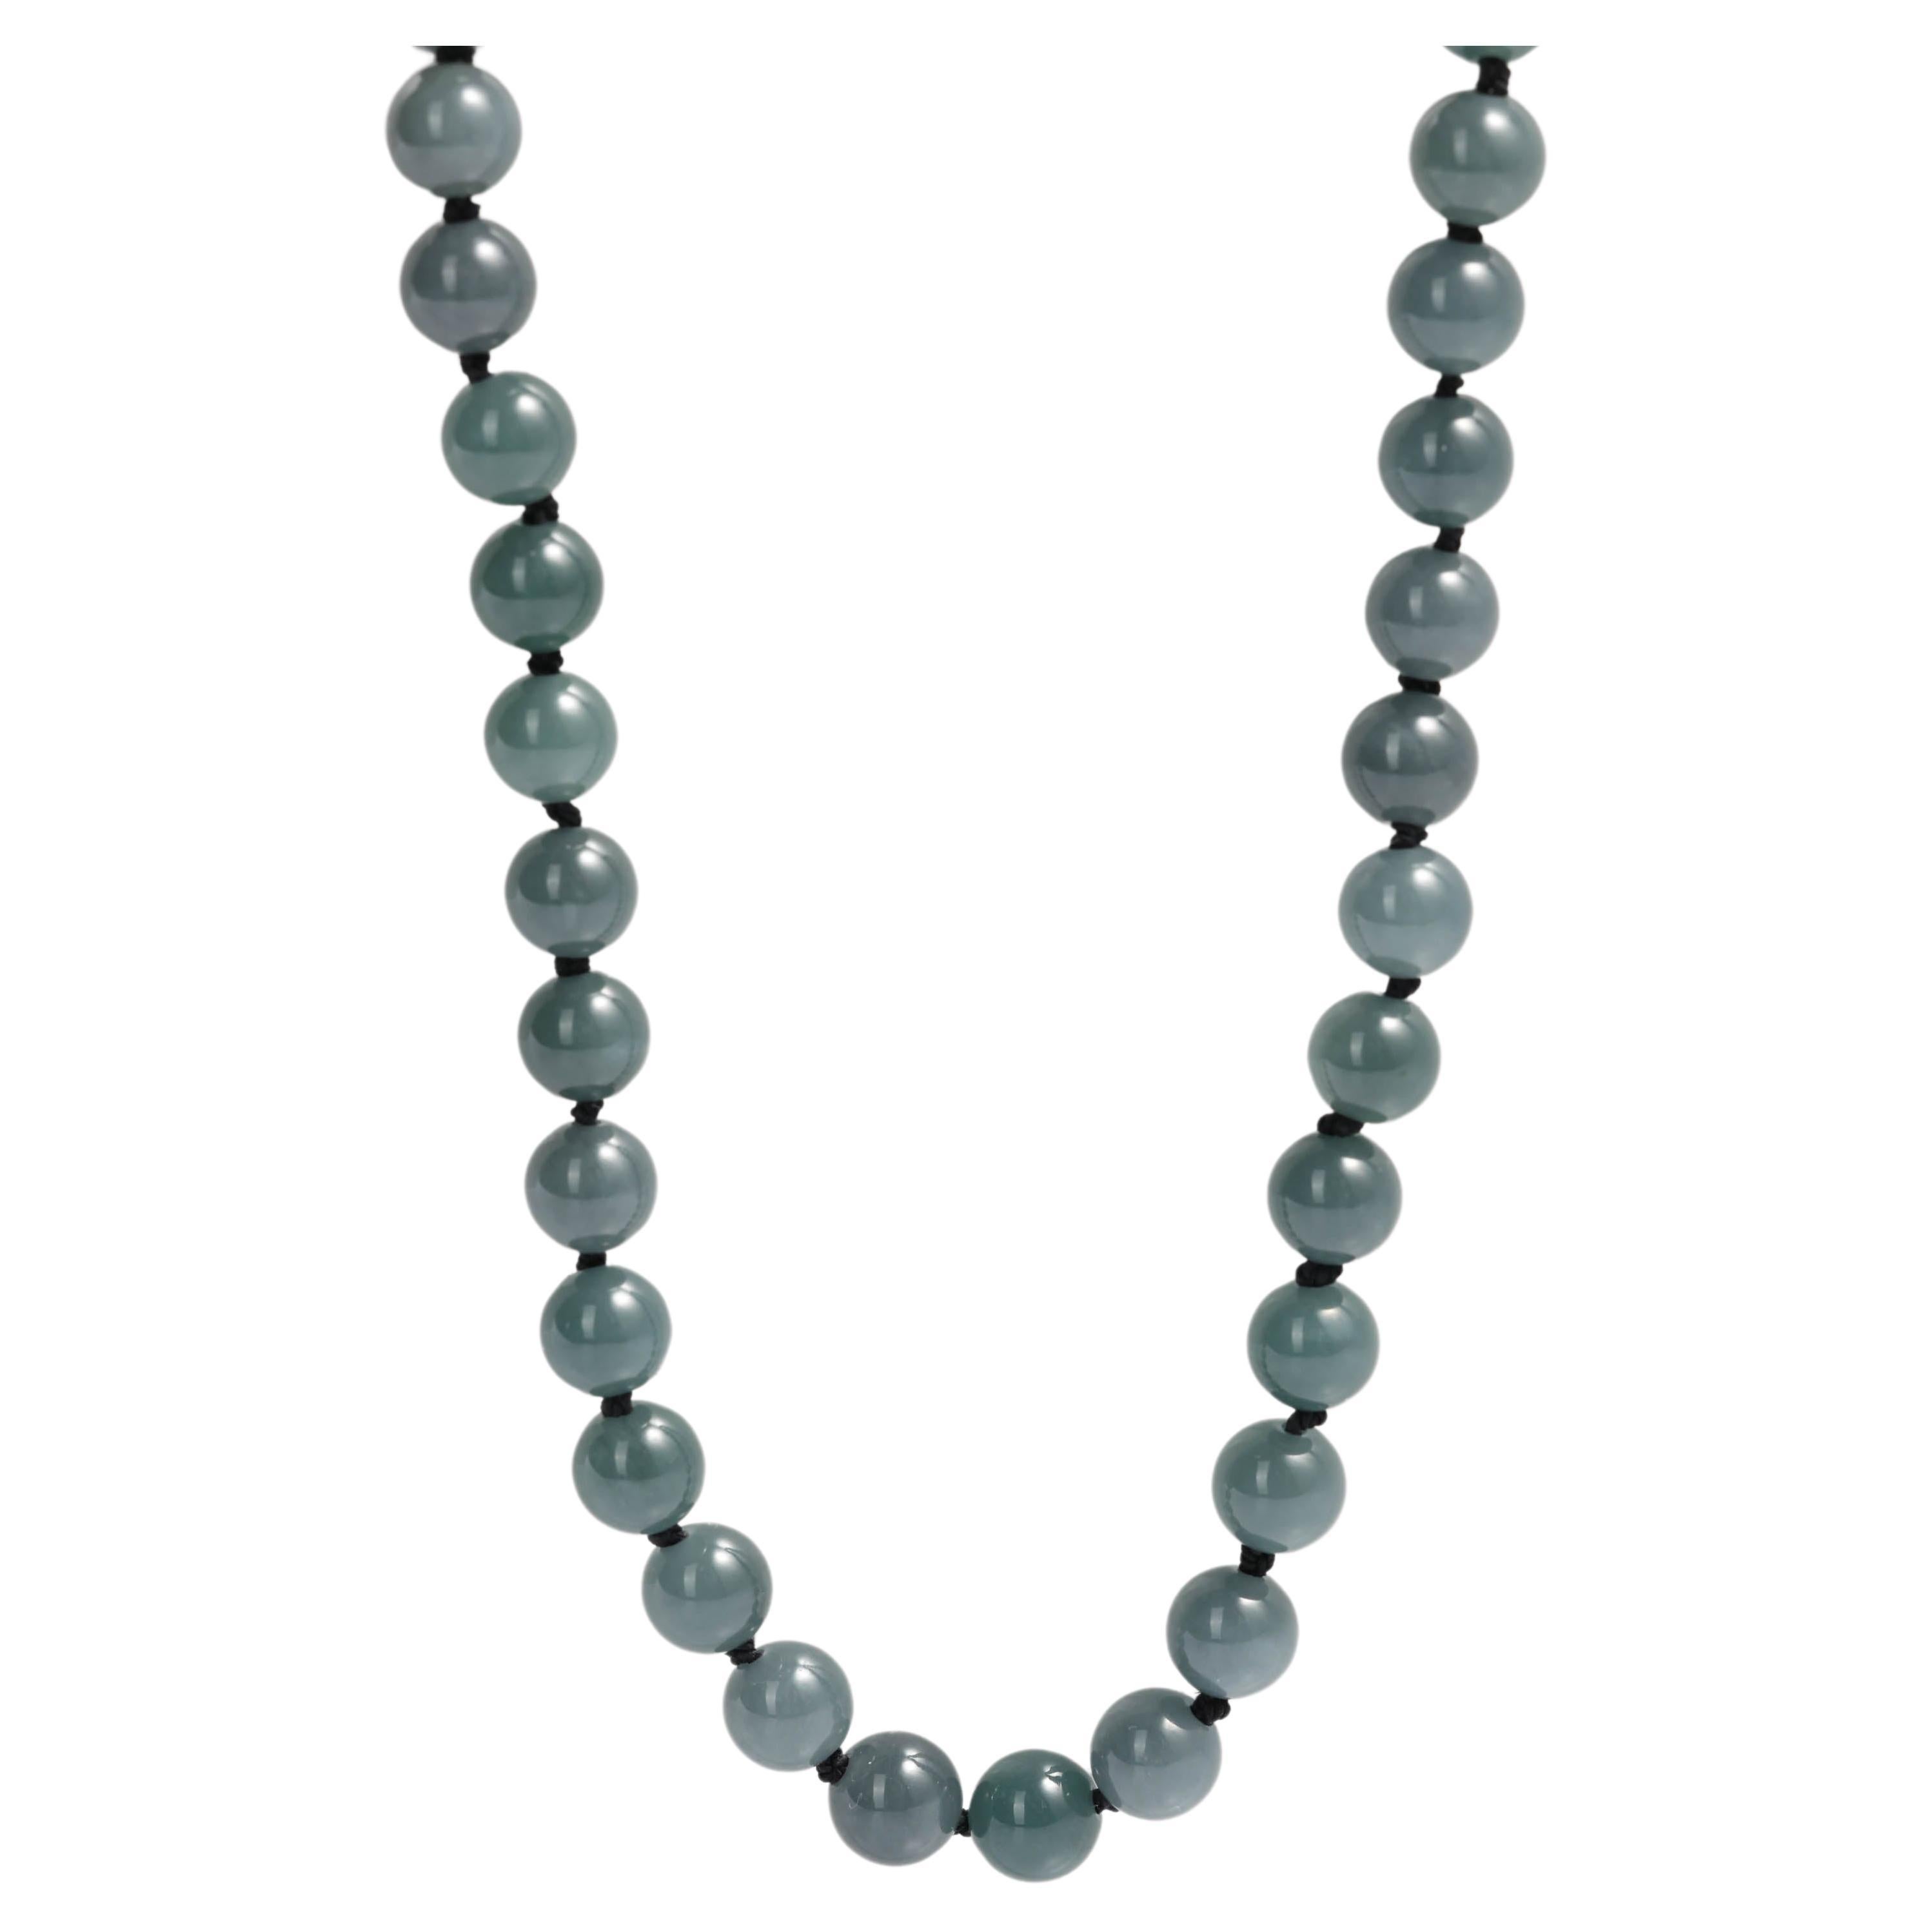 Jade Necklace Translucent Greenish-Blue Certified Untreated, New, 25" For Sale